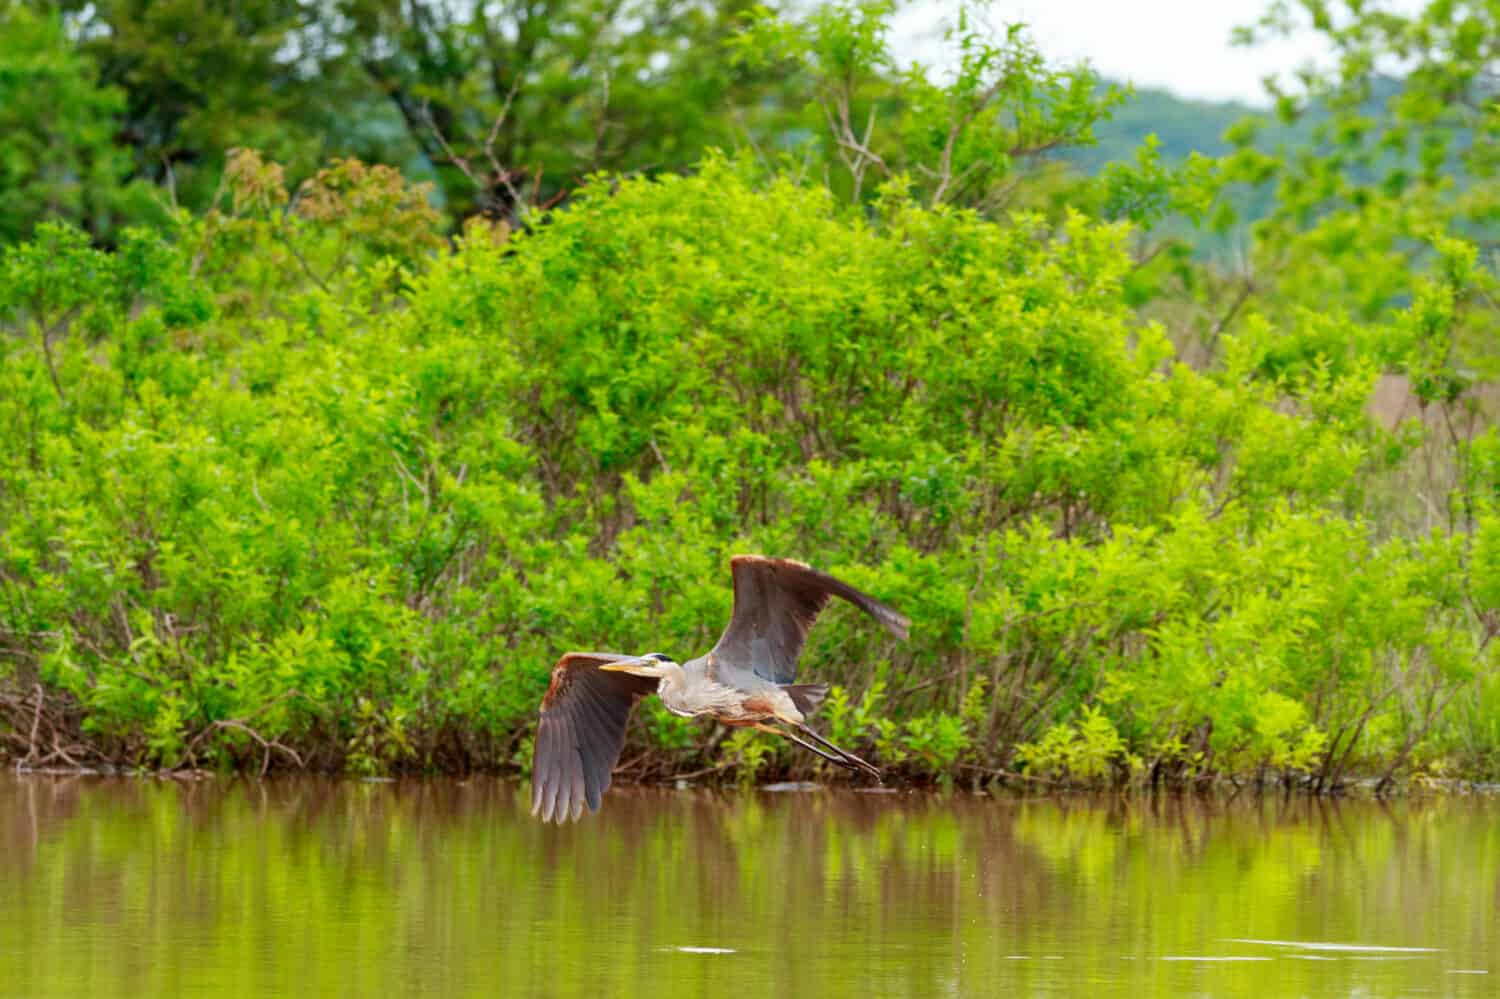 A great Blue Heron taking off to look for a new hunting spot at Lake Eufaula State Park in Checotah, Oklahoma 2017